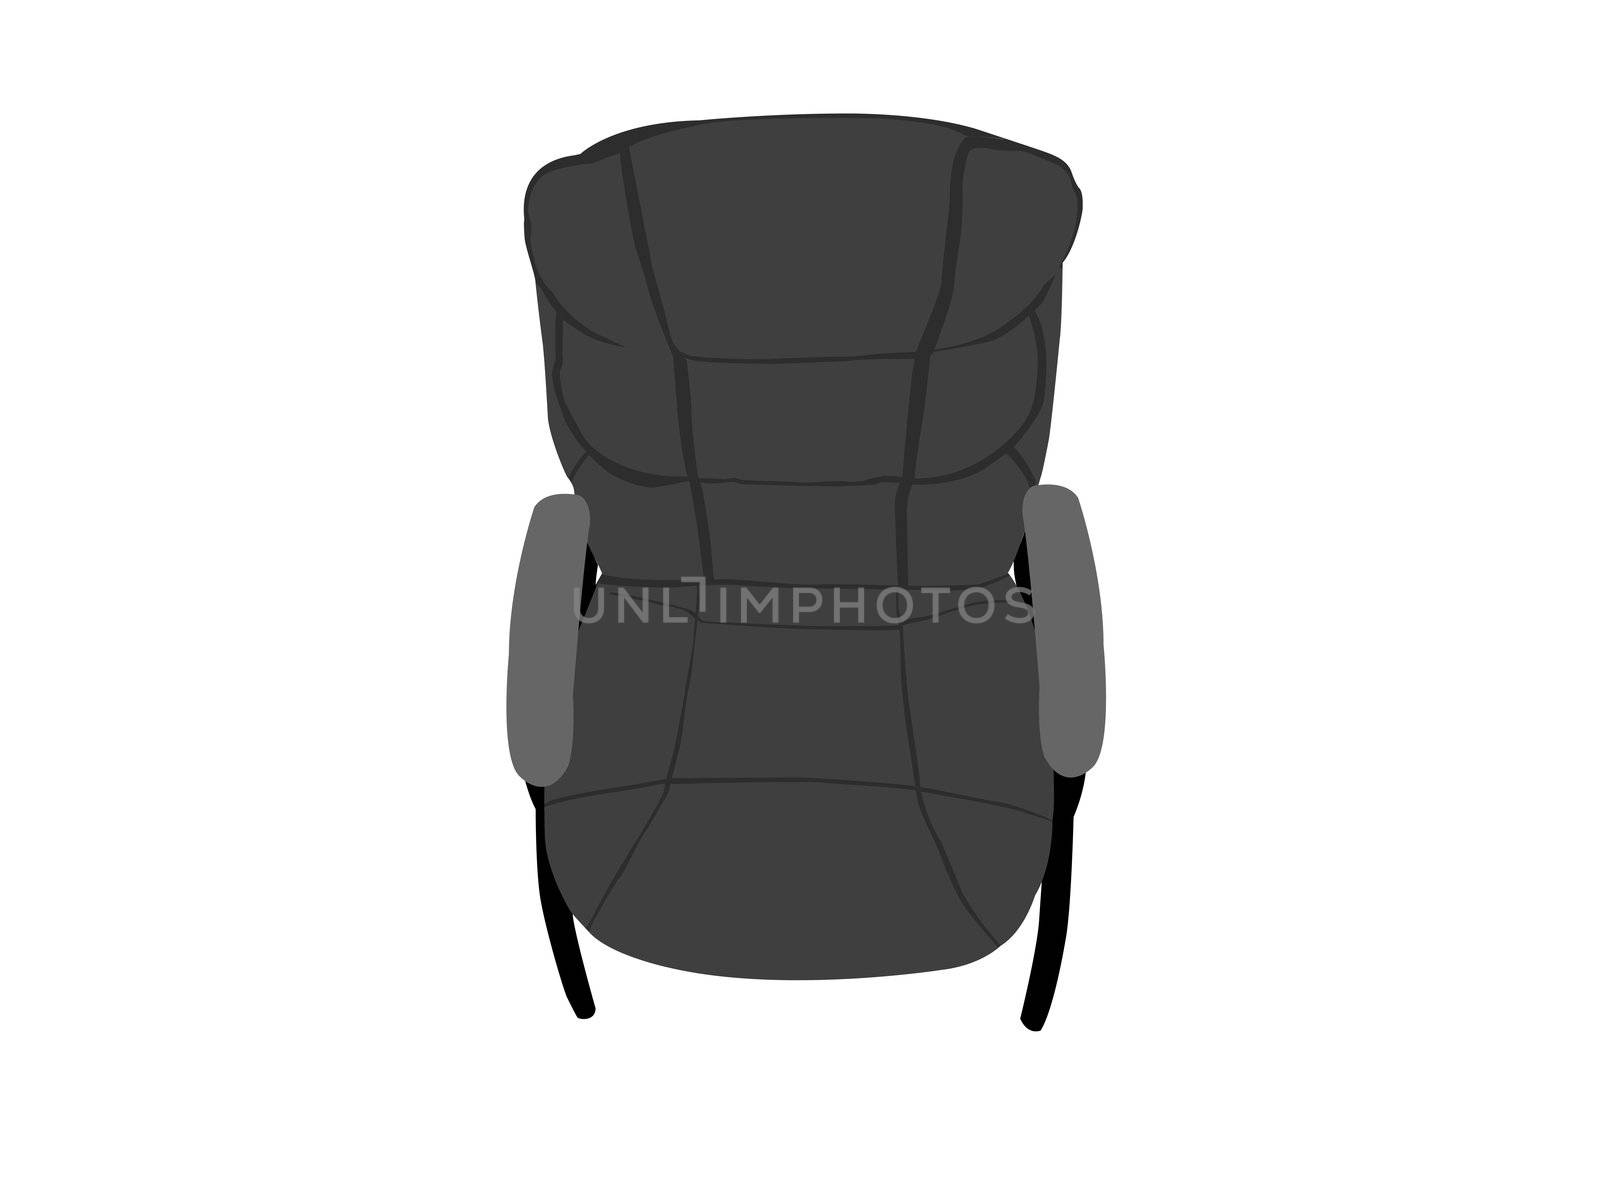 leather chair by imagerymajestic